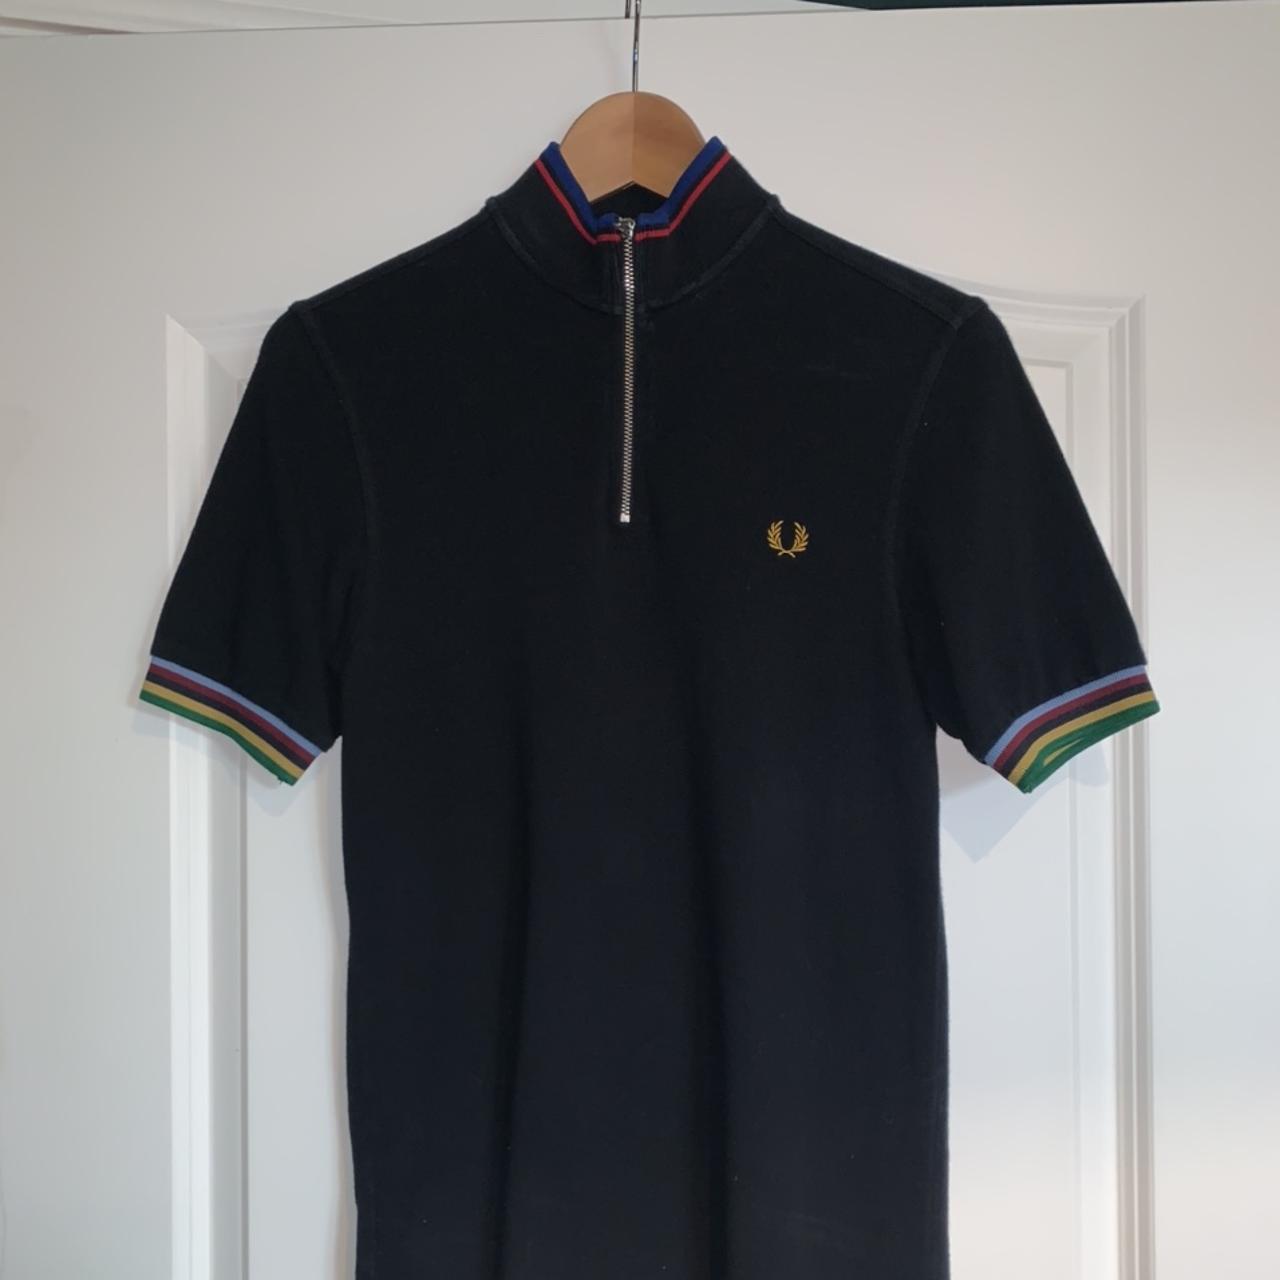 Fred Perry Bradley Wiggins cycling jersey style top....